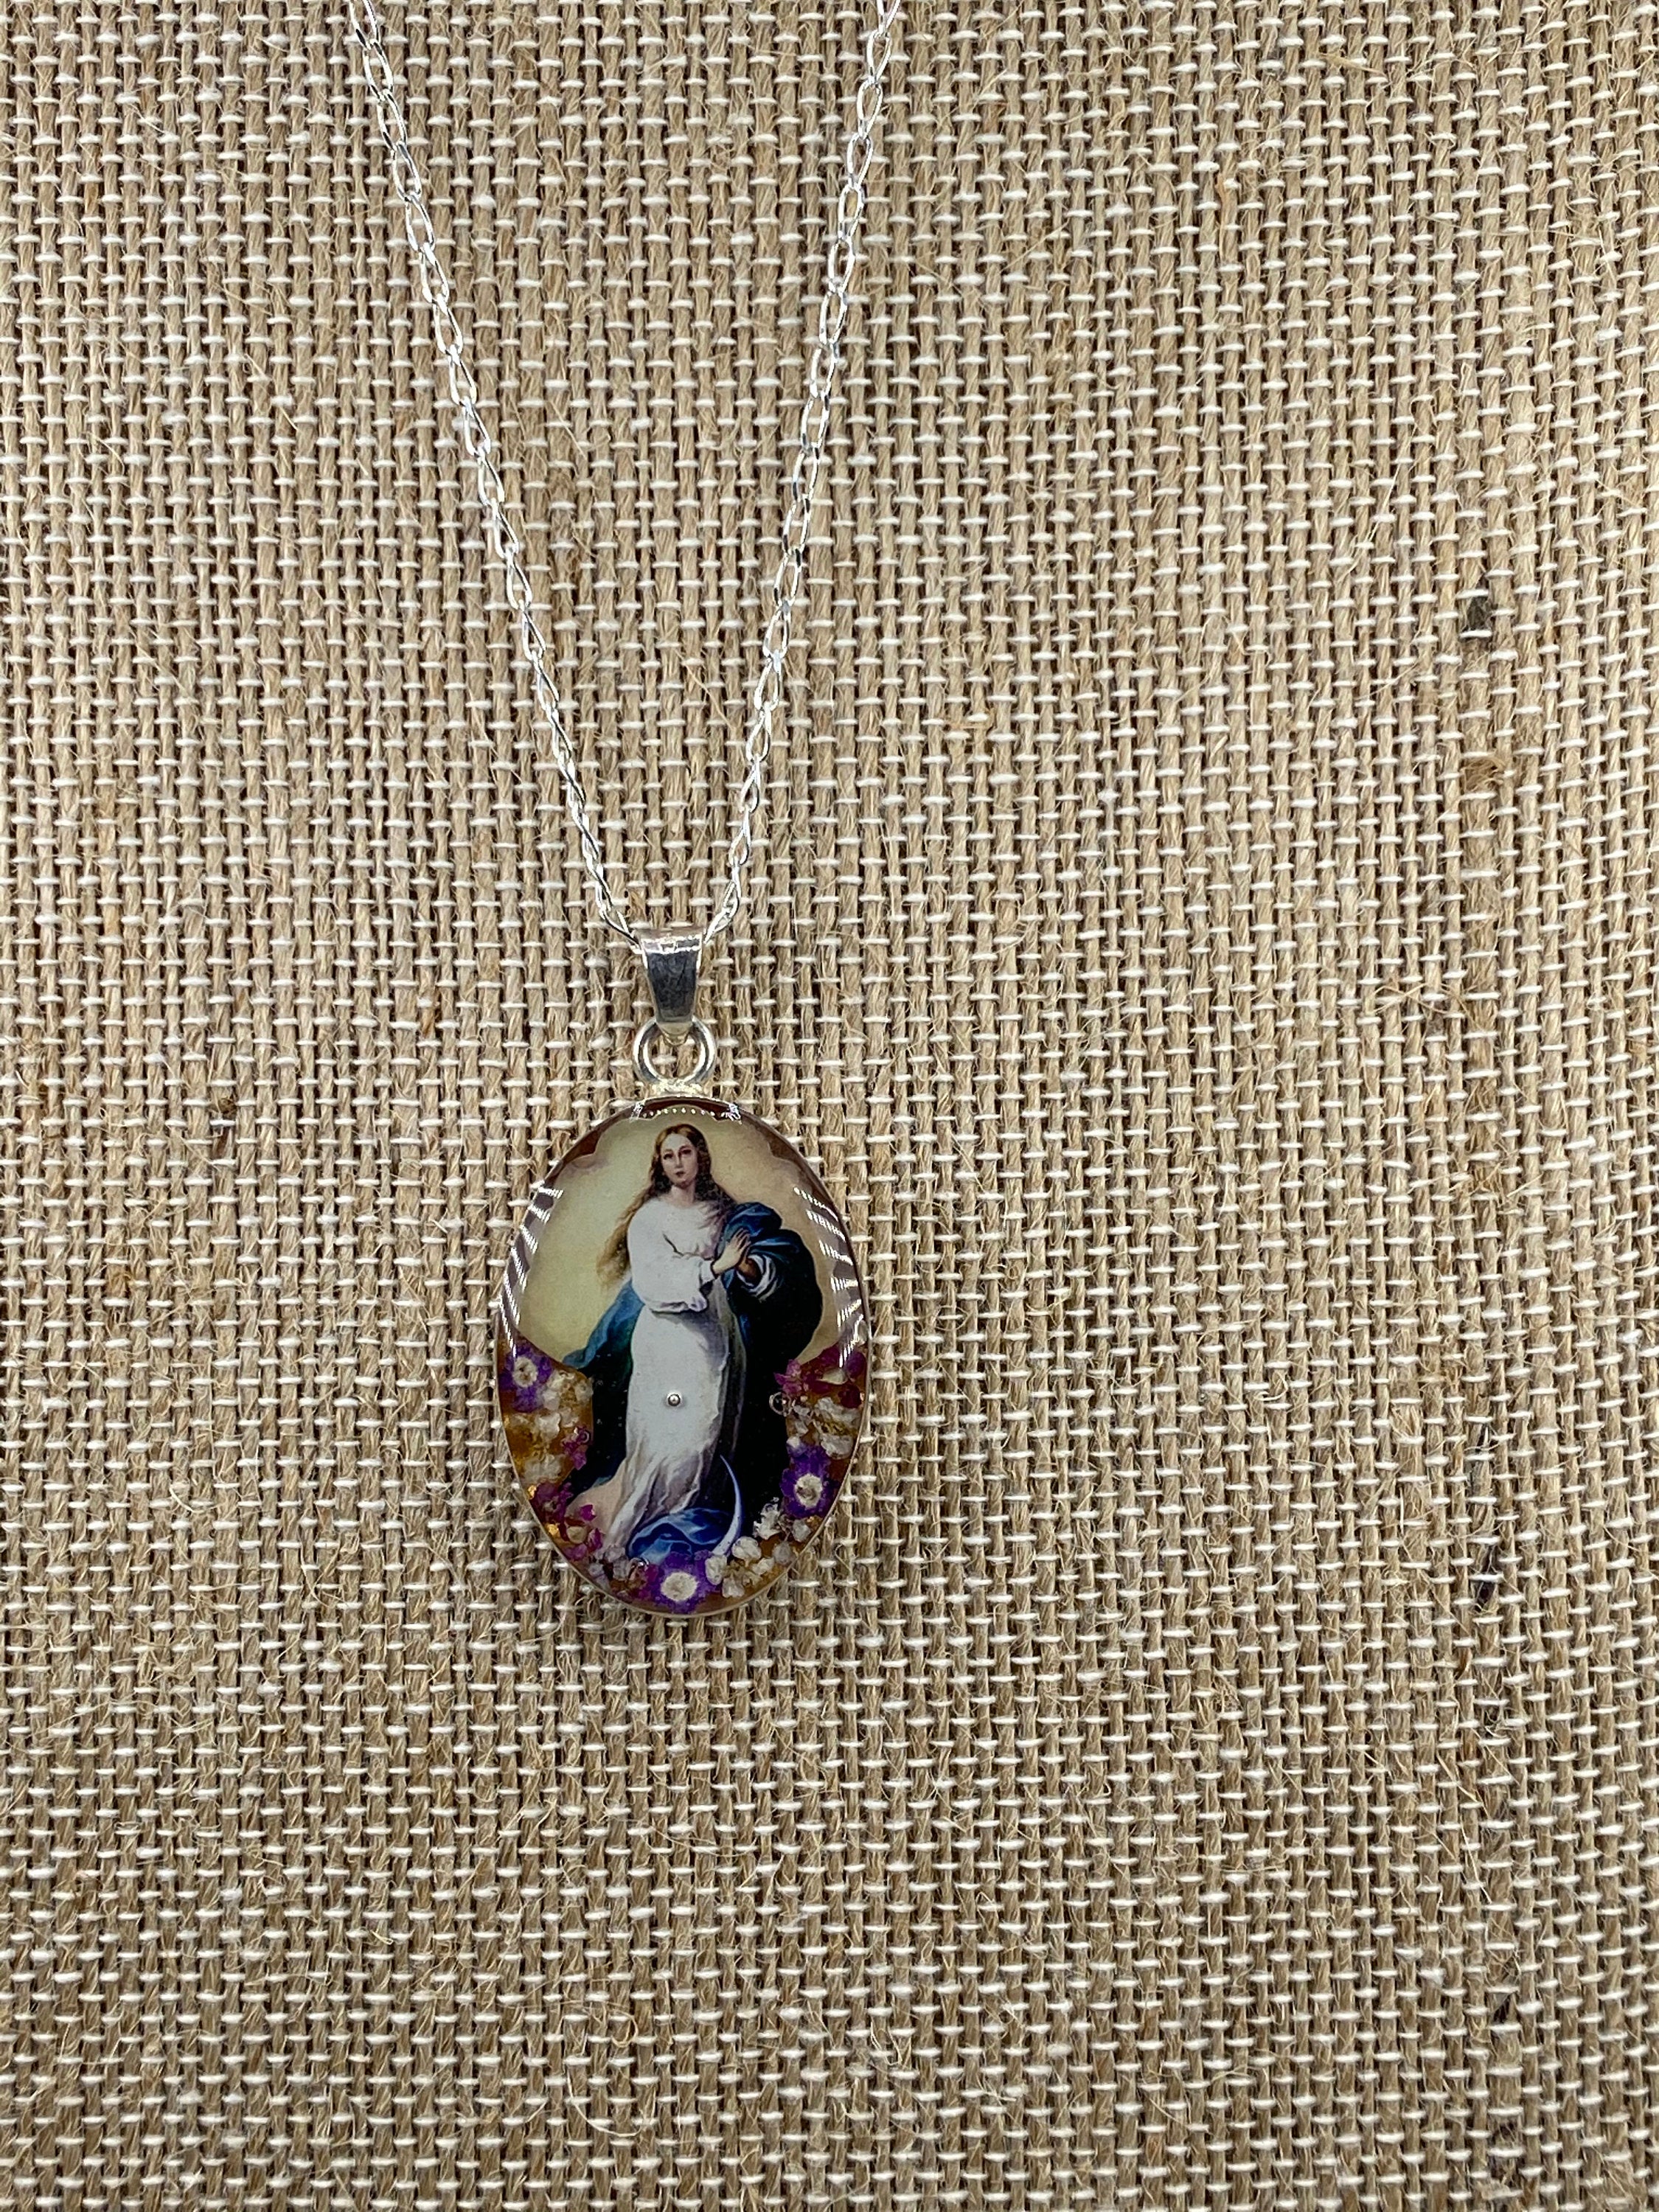 The Immaculate Conception  / La Inmaculada Concepcion   - Guadalupe Collection